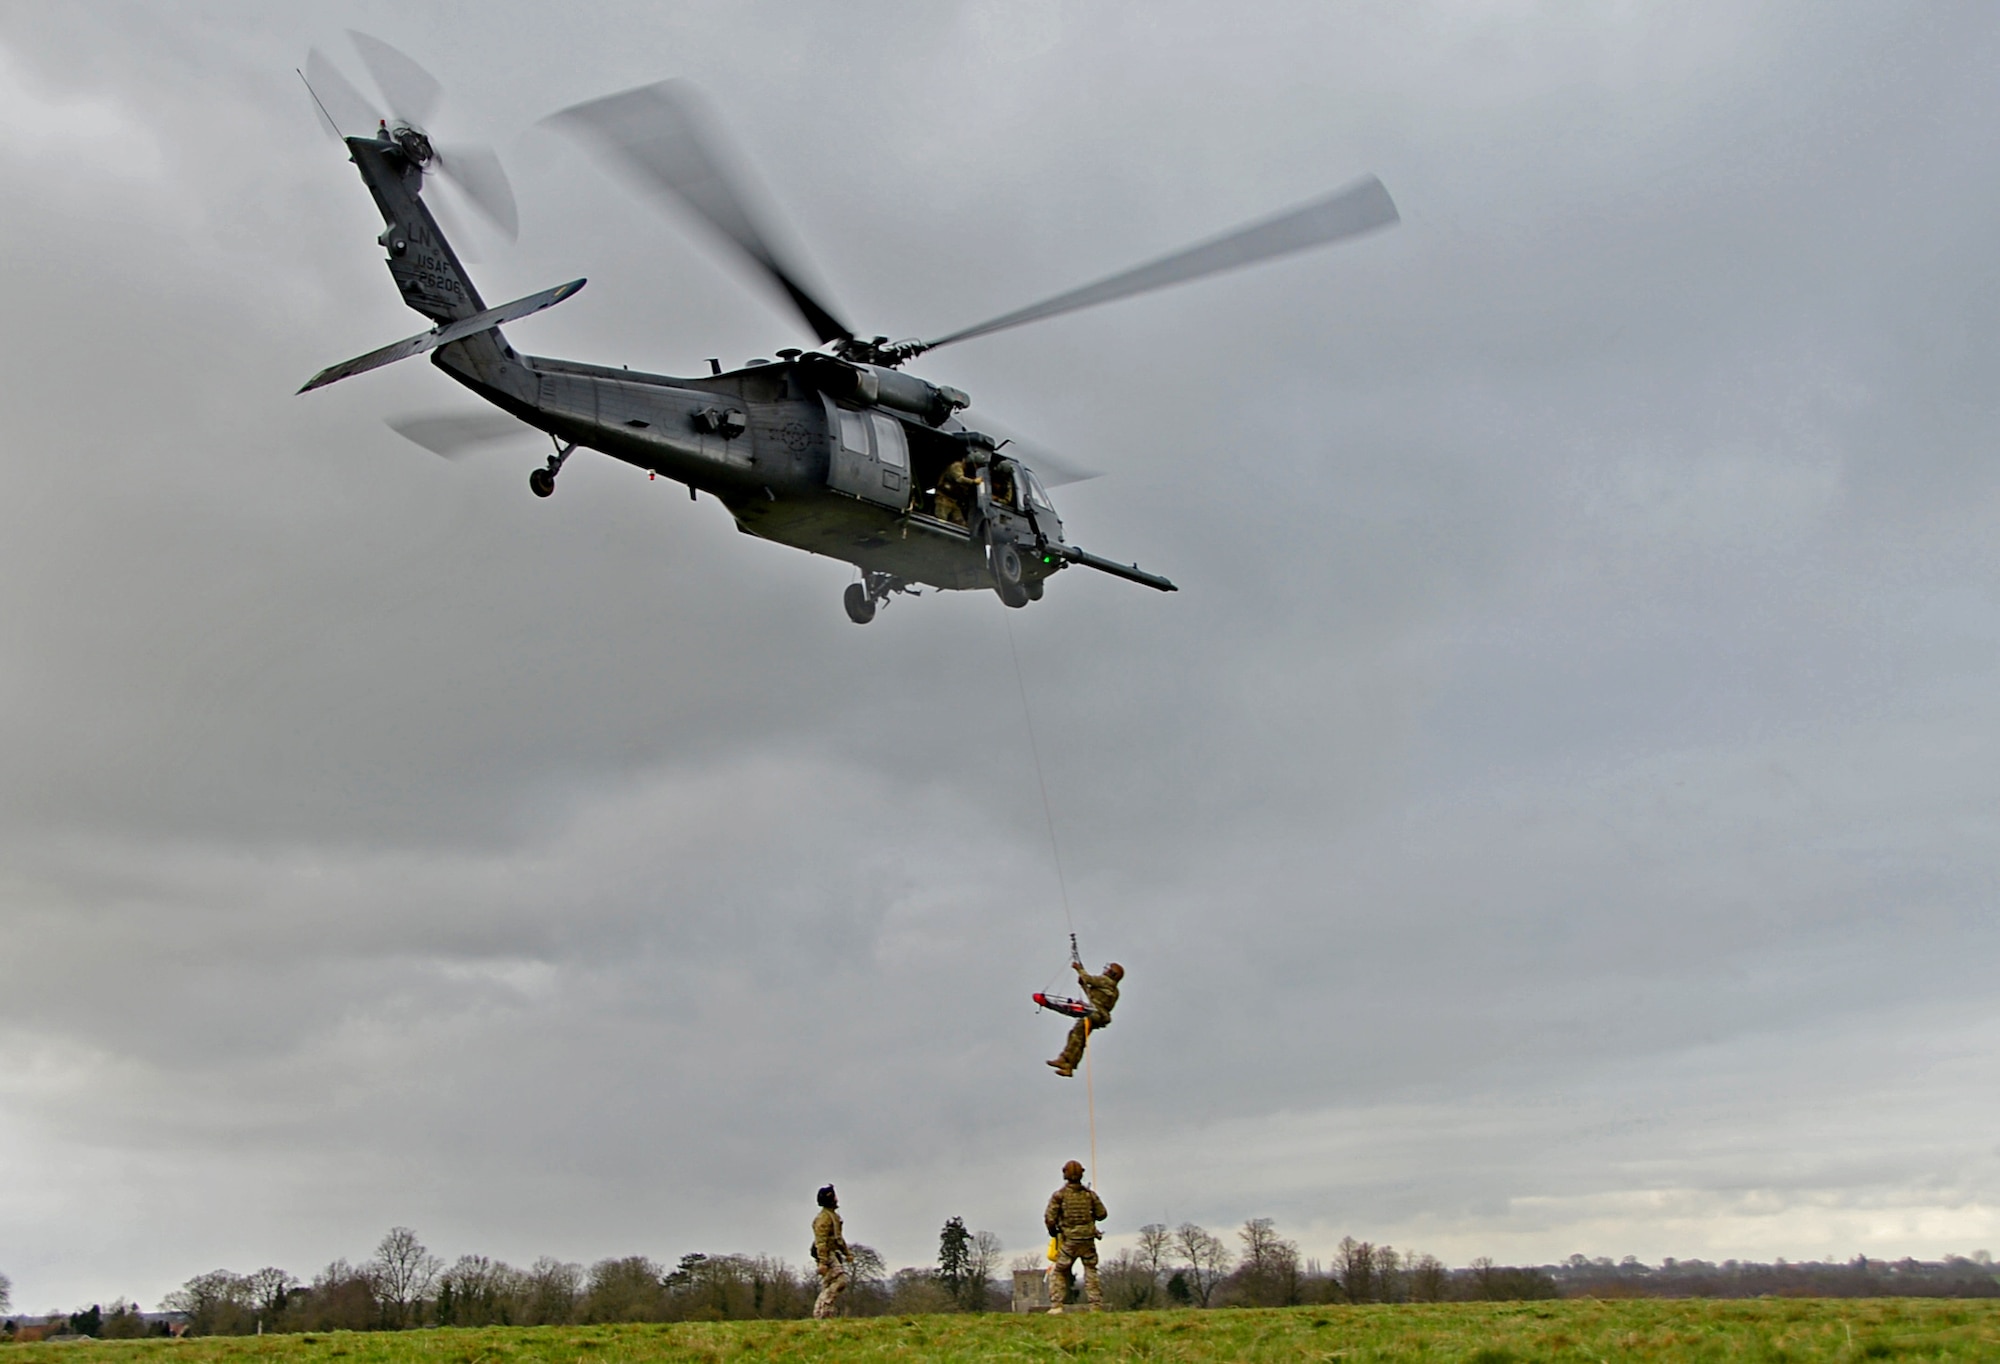 A 57th Rescue Squadron pararescueman is hoisted into an HH-60G Pave Hawk during a combat search and rescue task force exercise near Hinderclay, England, Feb. 4, 2016. Airmen assigned to the 56th and 57th RQSs performed various CSAR maneuvers in response to a simulated threat scenario. (U.S. Air Force photo/Senior Airman Erin Trower)